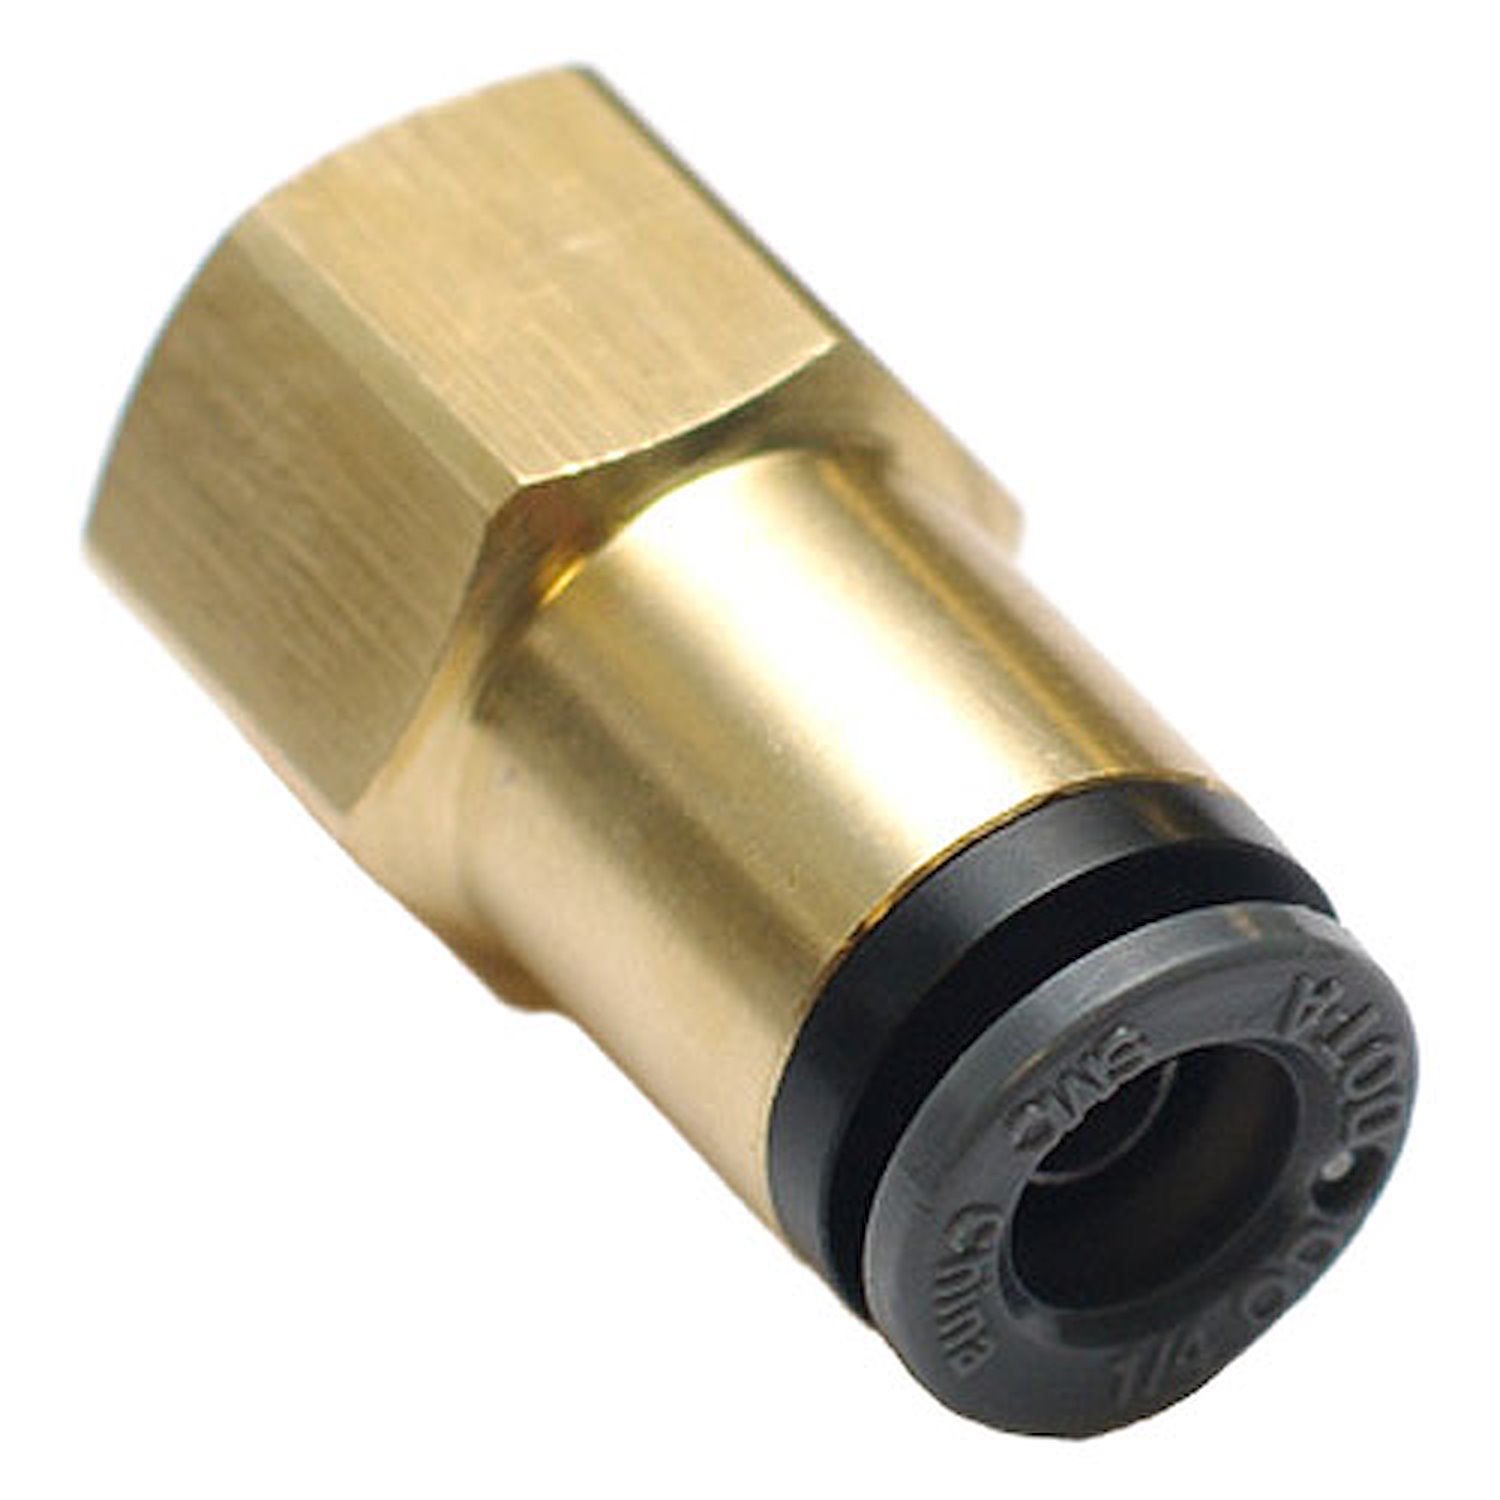 Airline Adapter Fitting 1/8 in. NPT Female to 1/8 in. Airline